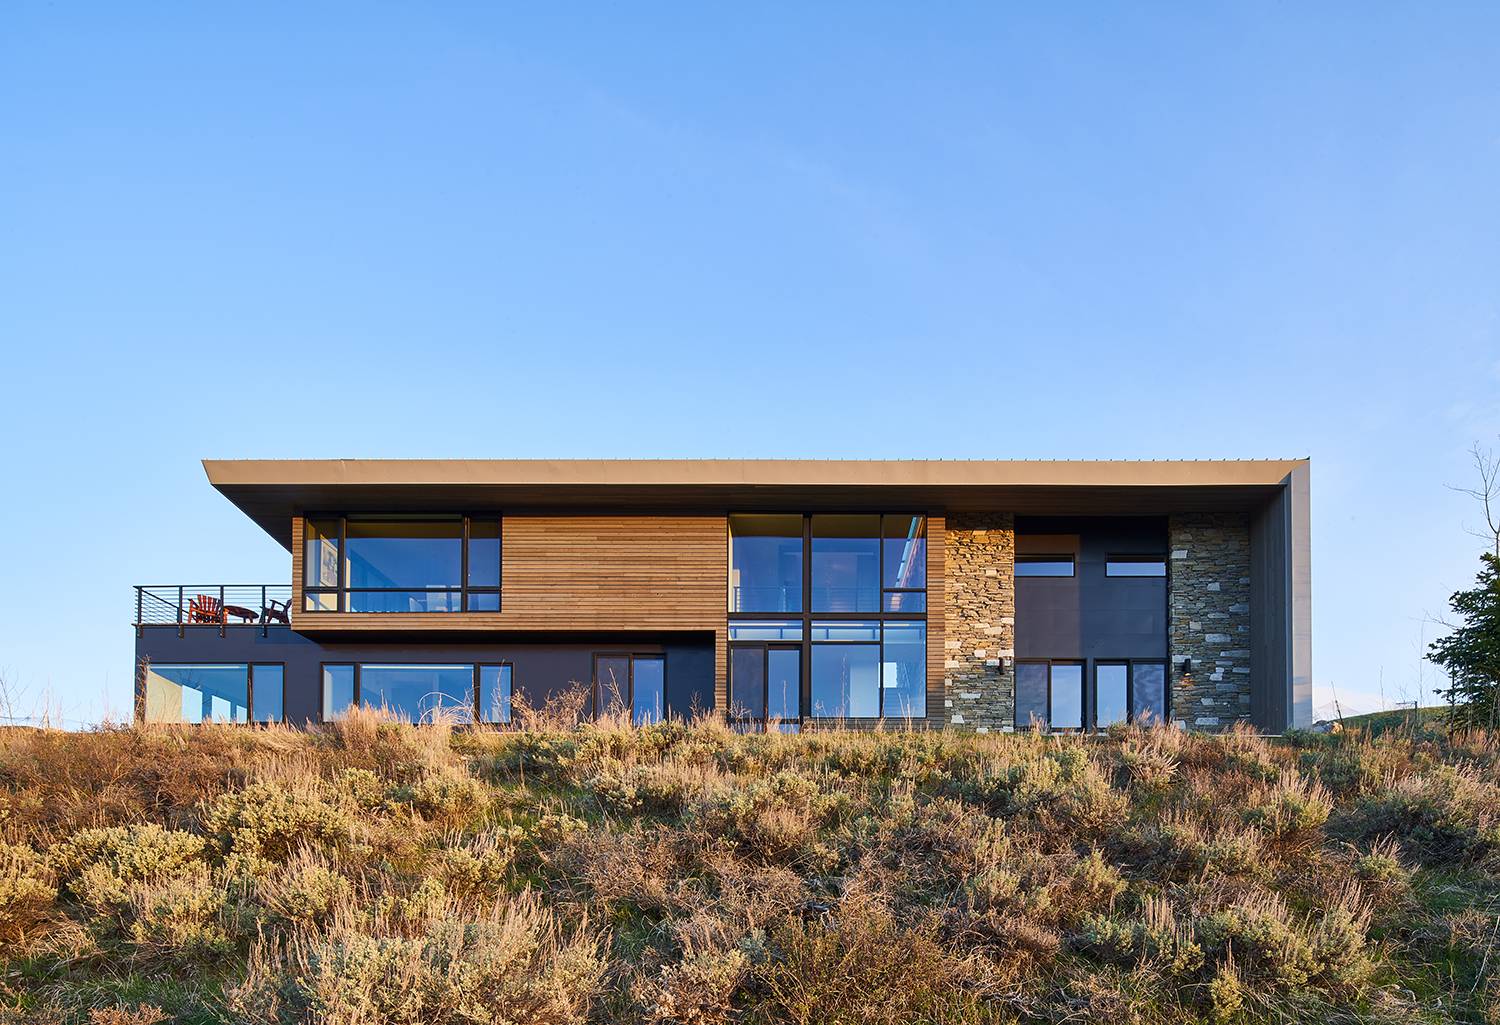 Exterior view of the back of the property at Gros Ventre West, a custom home designed and built by Farmer Payne Architects.